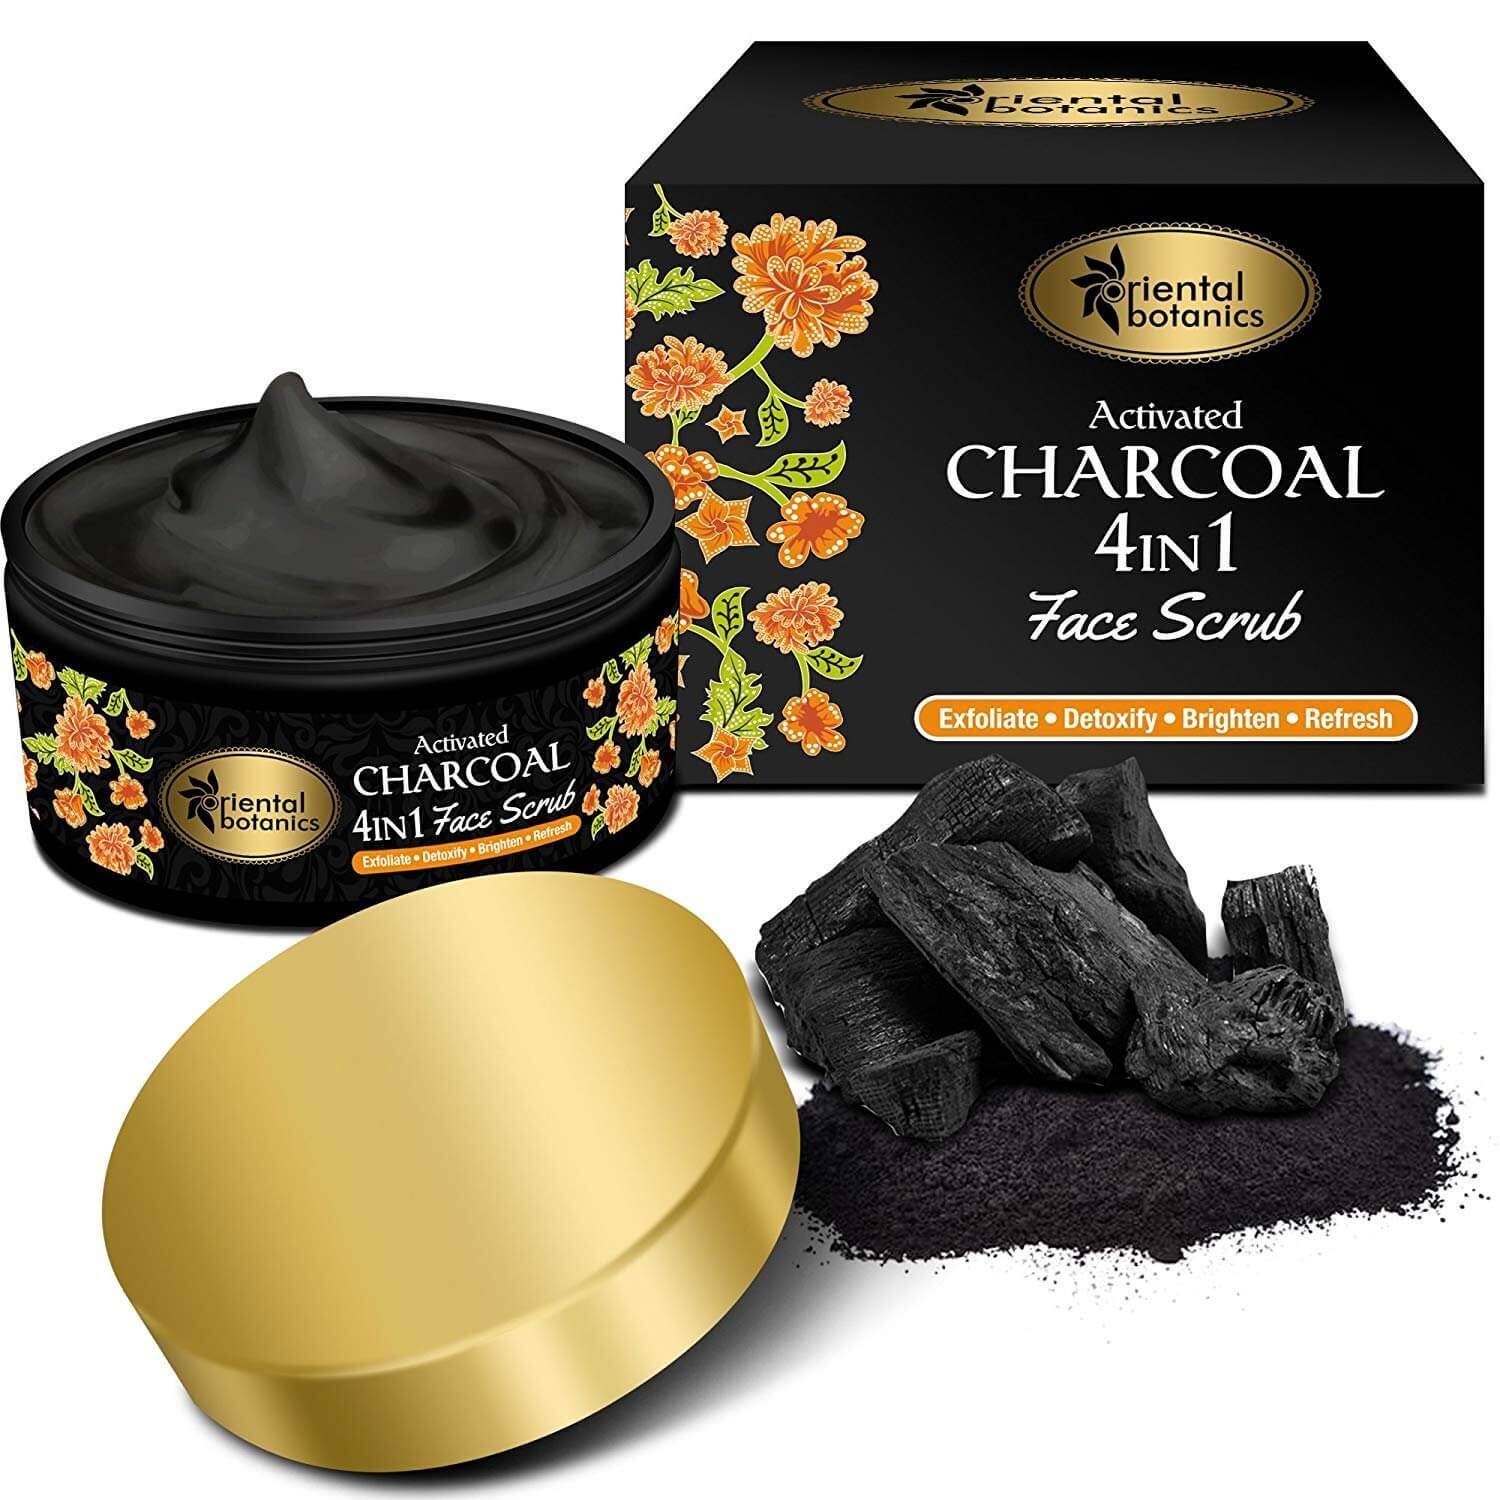 Oriental Botanics Activated Charcoal 4 In 1 Face Scrub